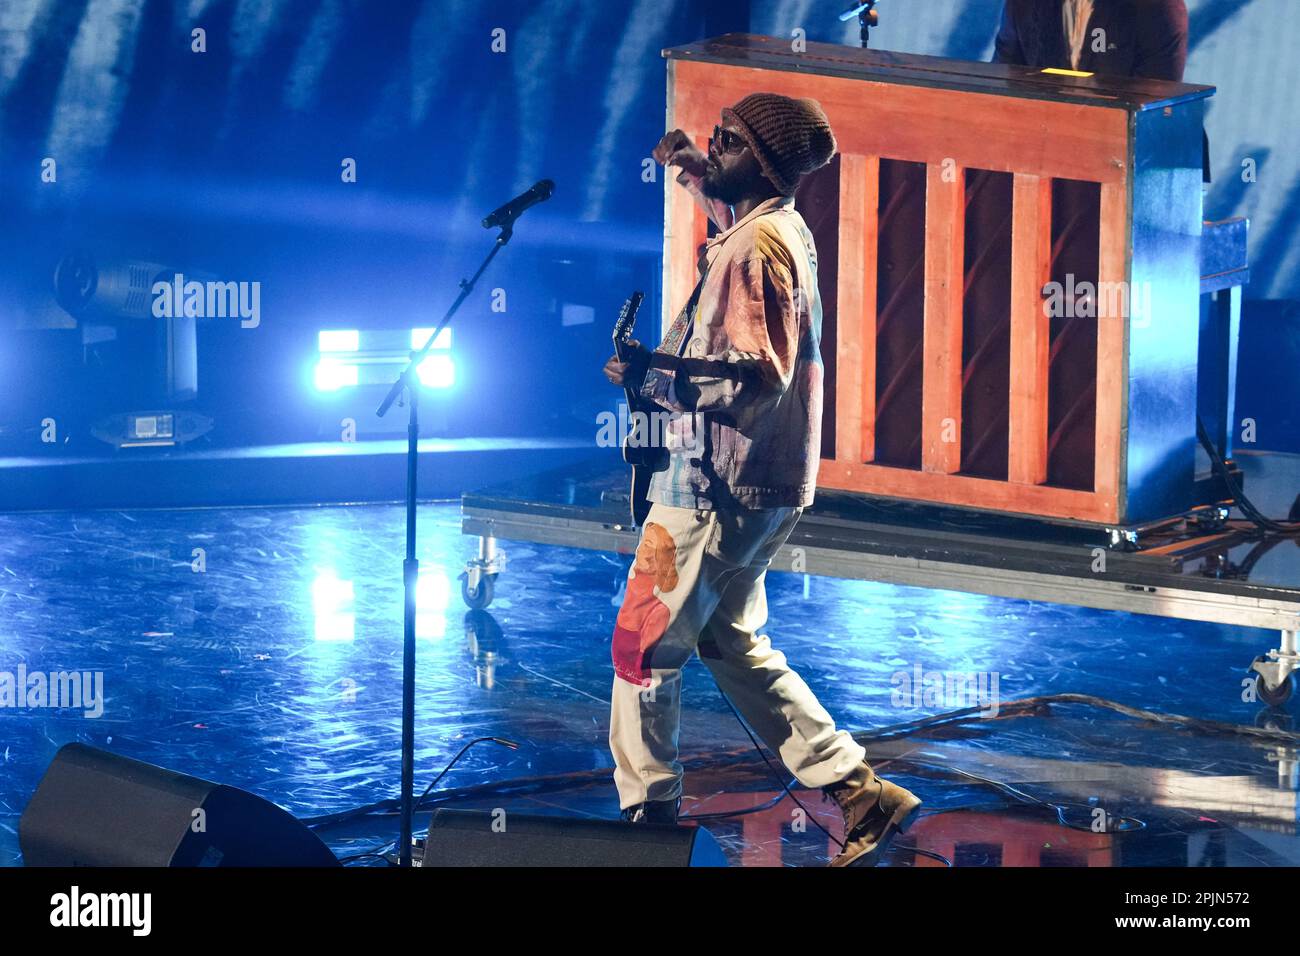 Austin guitarist and singer GARY CLARK JR. performs a tribute to another Austin guitarist, Stevie Ray Vaughn, onstage at the 2023 Country Music Television (CMT) Music Awards held for the first time in Austin, Texas on April 2, 2023 at the Moody Center before a sold out crowd. Credit: Bob Daemmrich/Alamy Live News Stock Photo